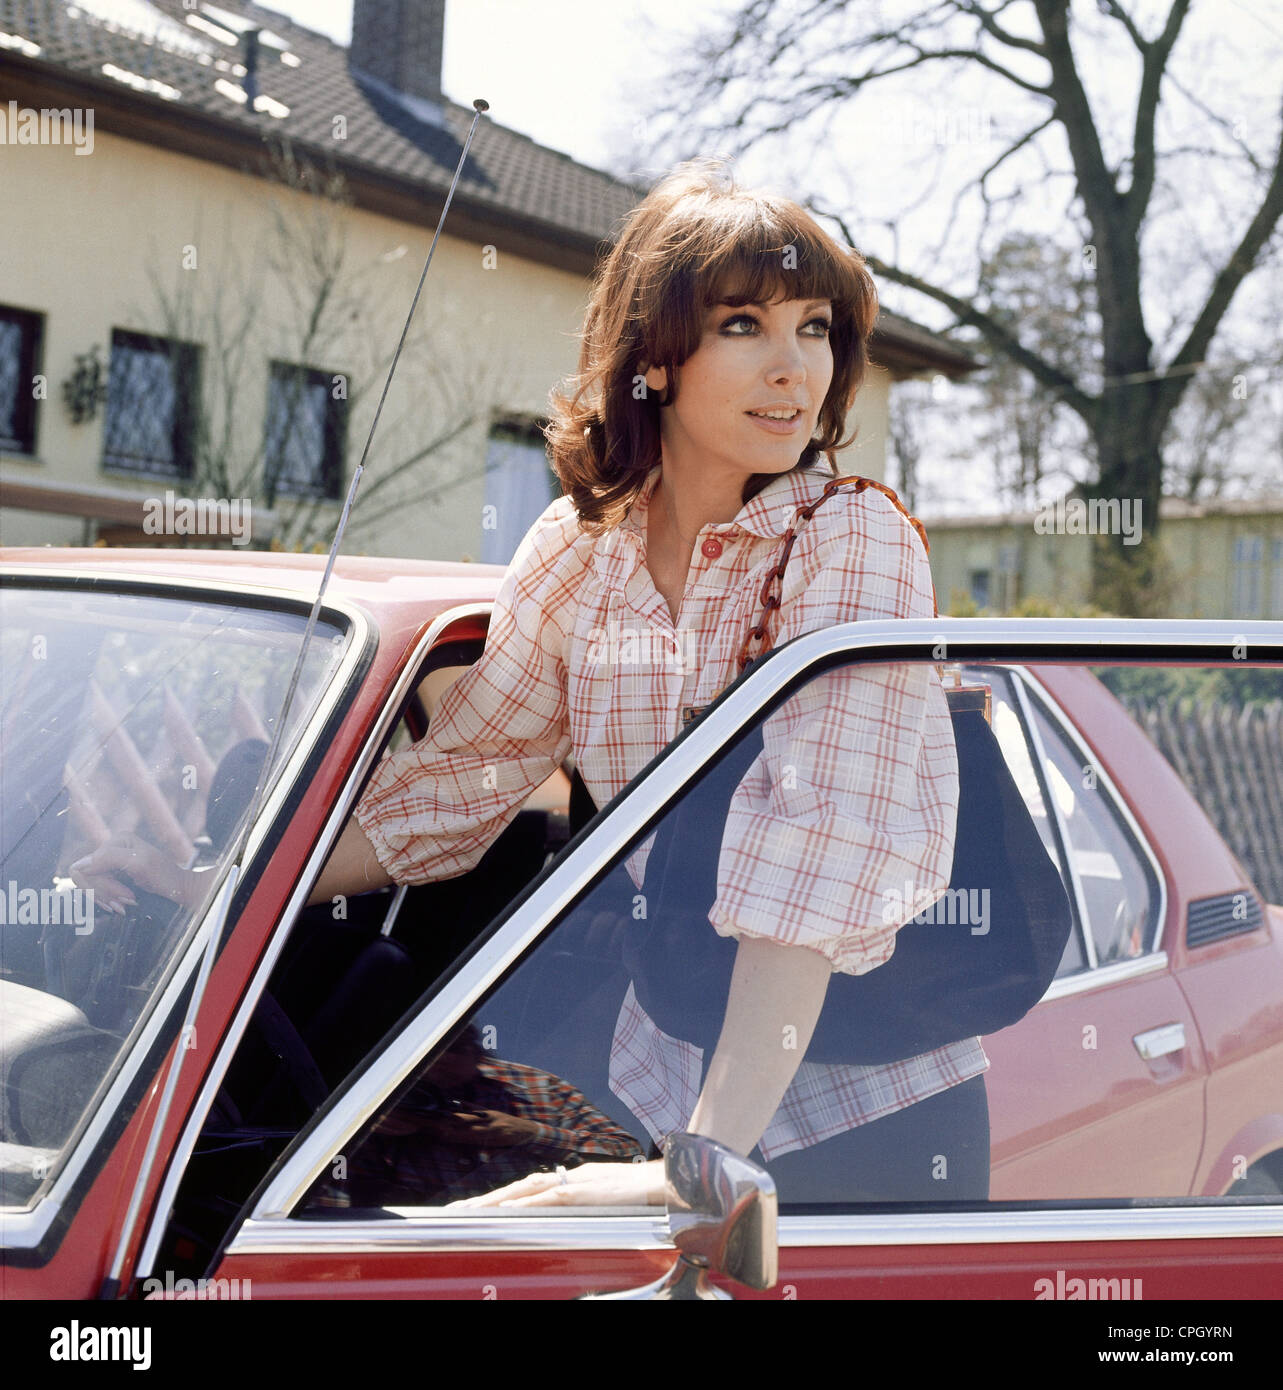 Schuermann, Petra, 15.9.1935 - 13.1.2010, German actress, TV presenter, half length, in front of her house, at her car, 1970s, Stock Photo